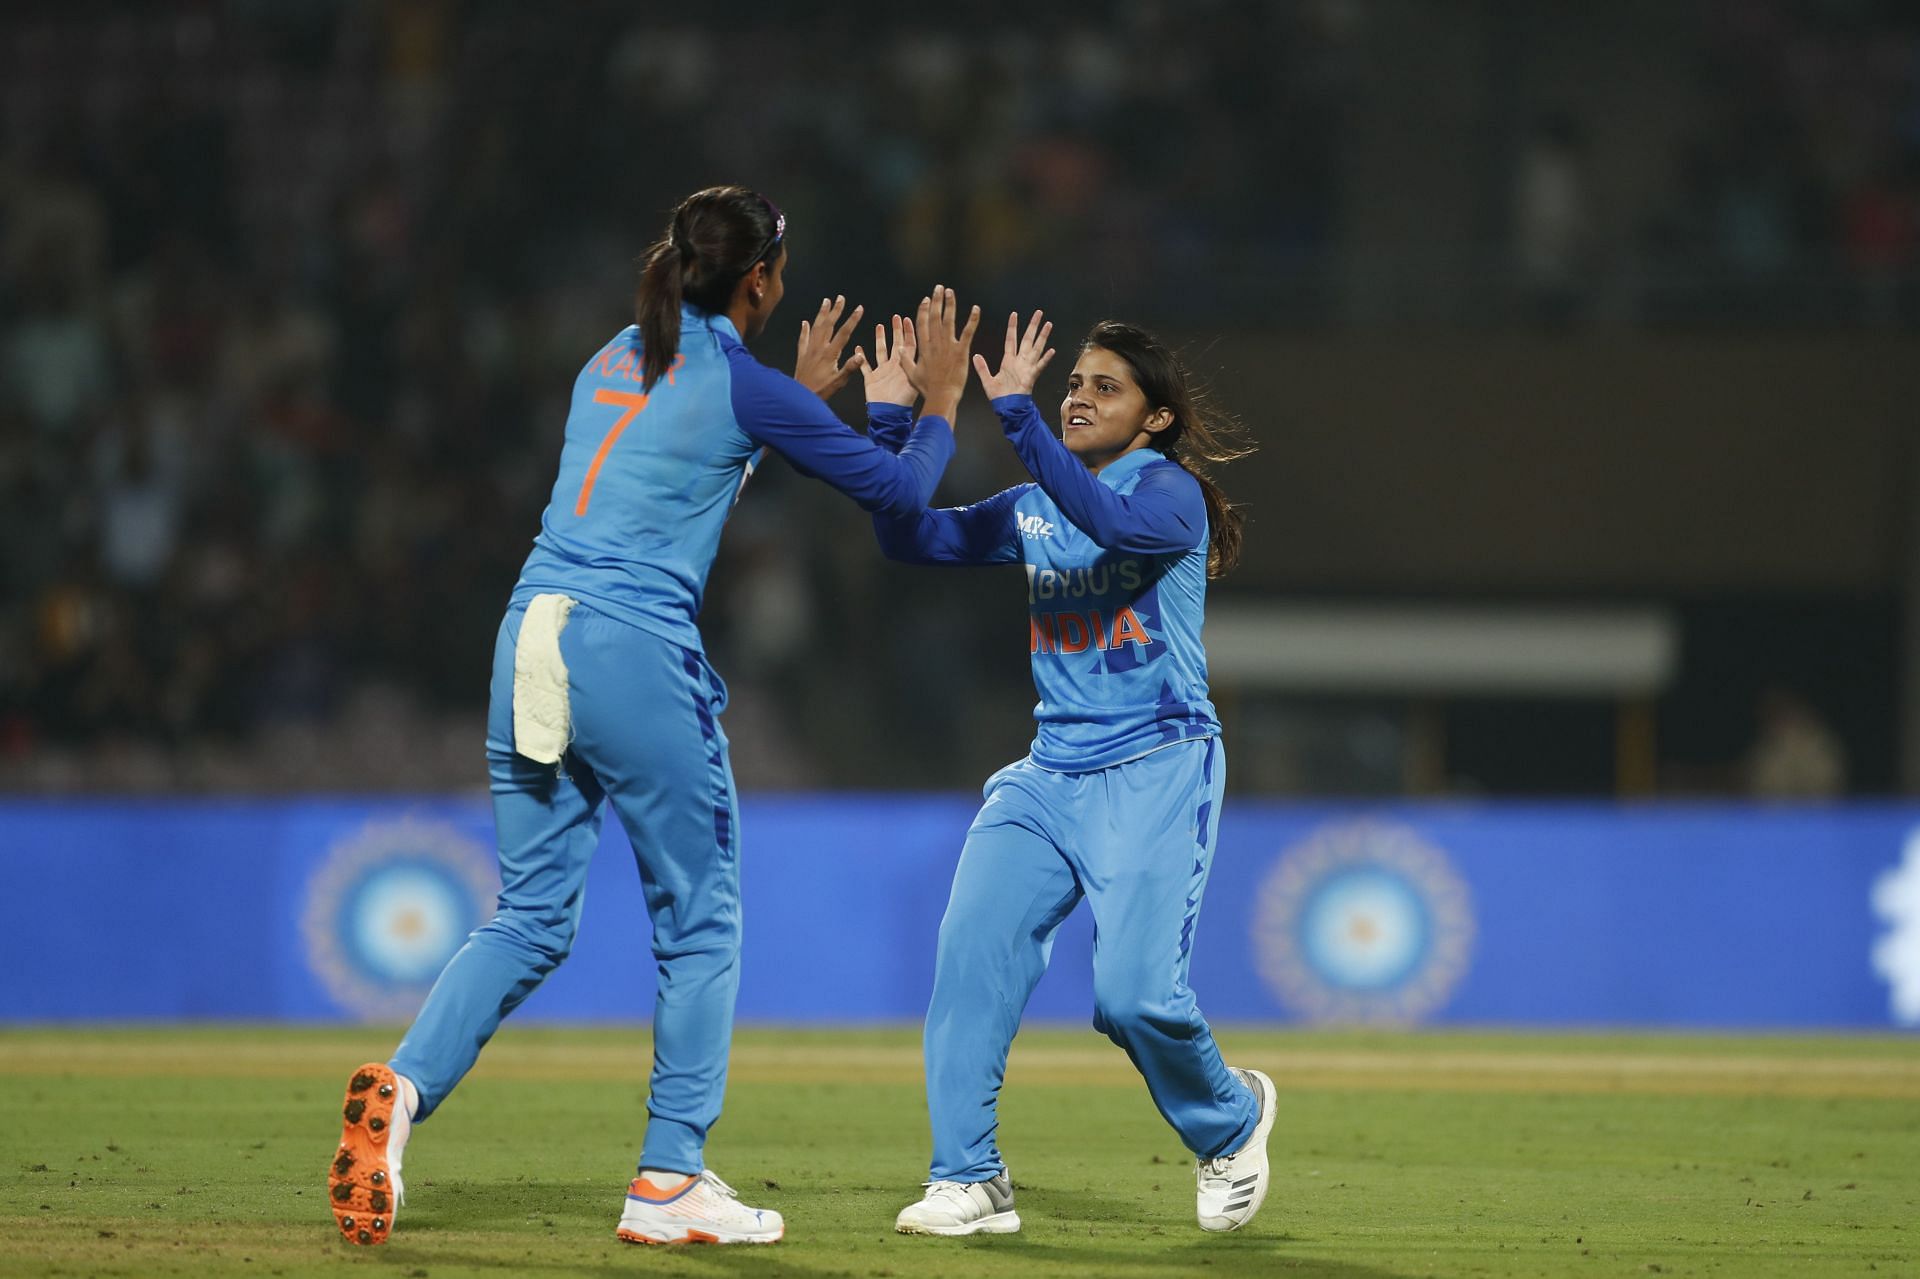 Devika Vaidya has played a handful of matches for India